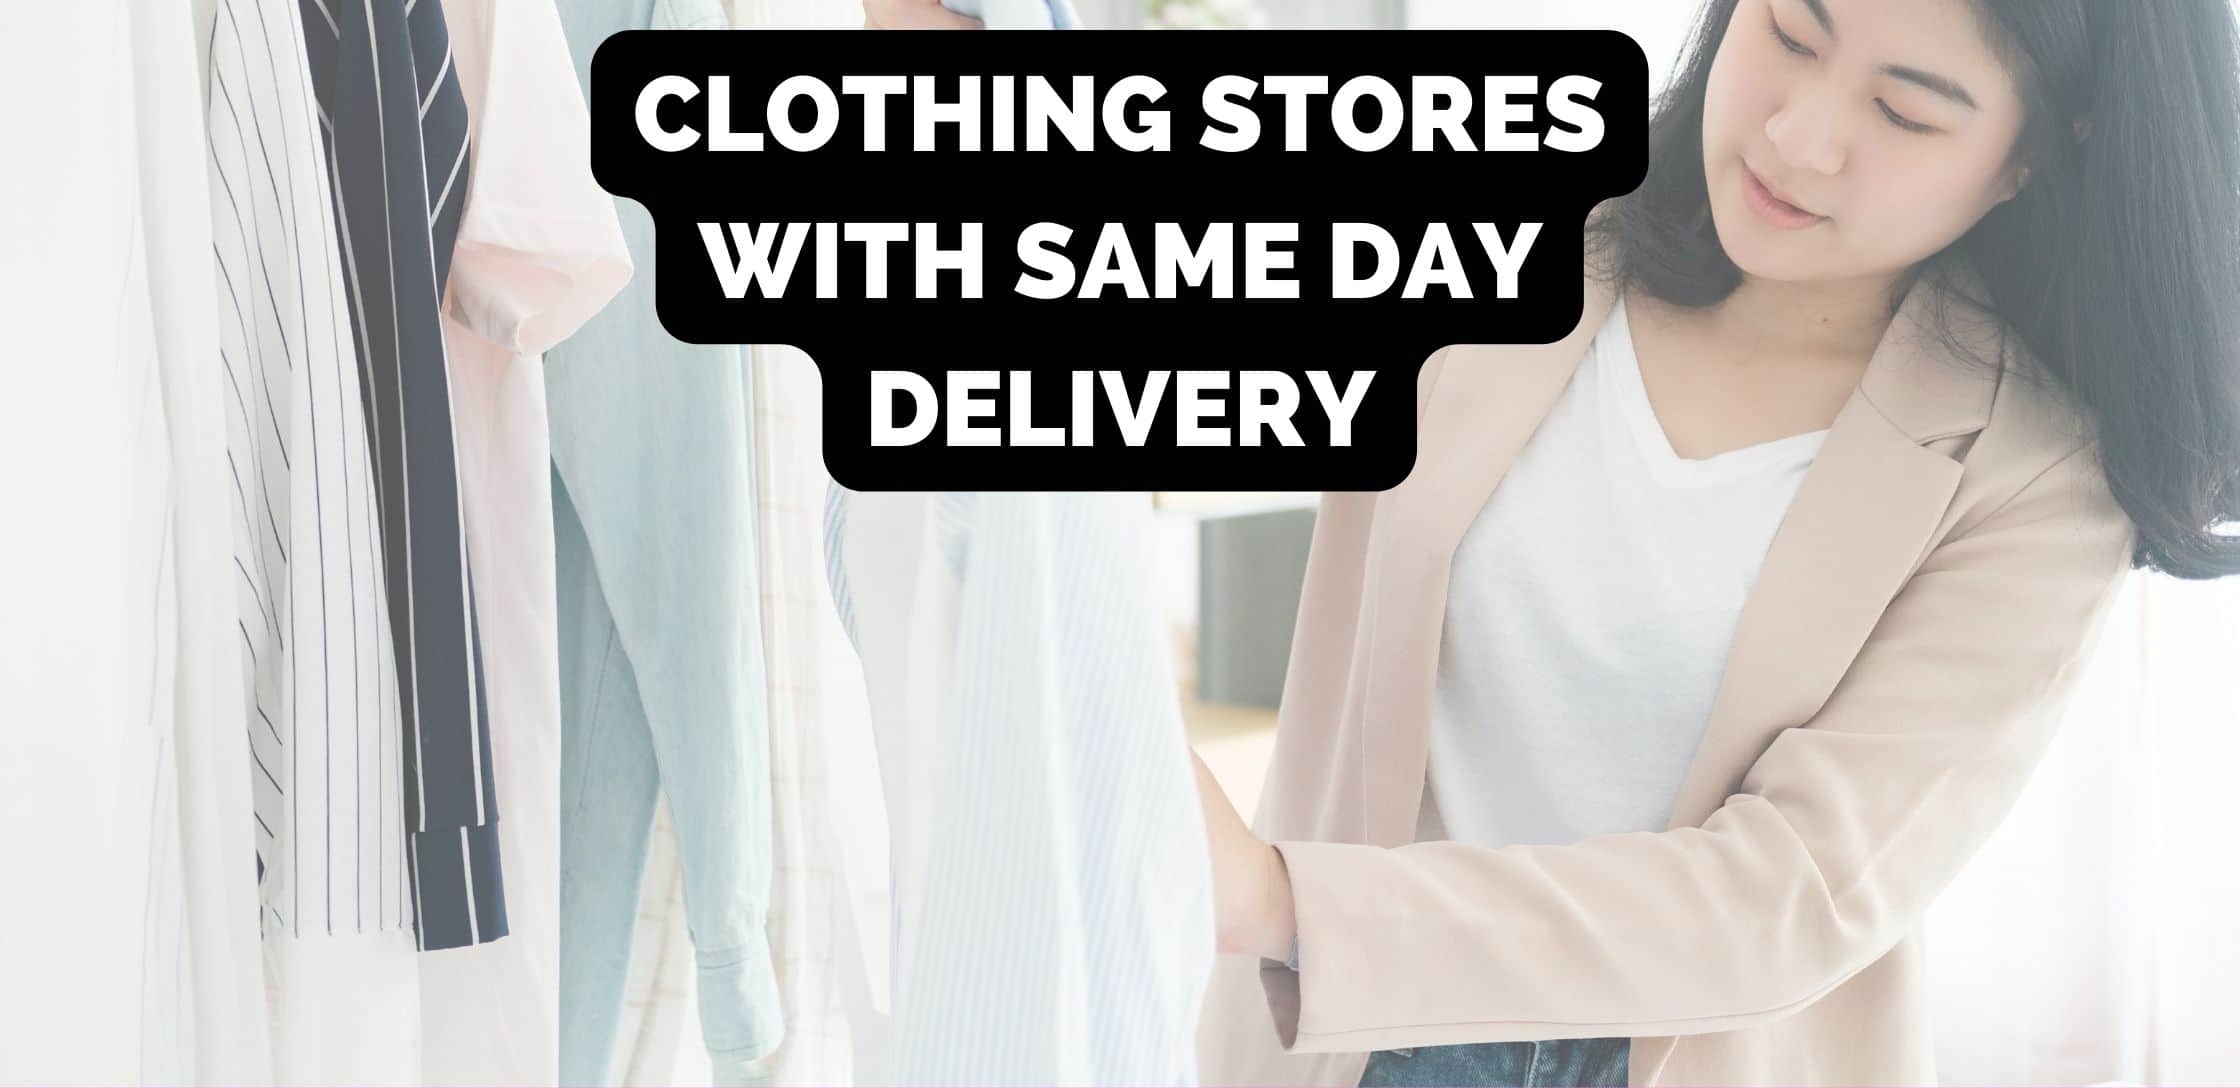 https://yofreesamples.com/wp-content/uploads/2022/06/Clothing-Stores-With-Same-Day-Delivery.jpg